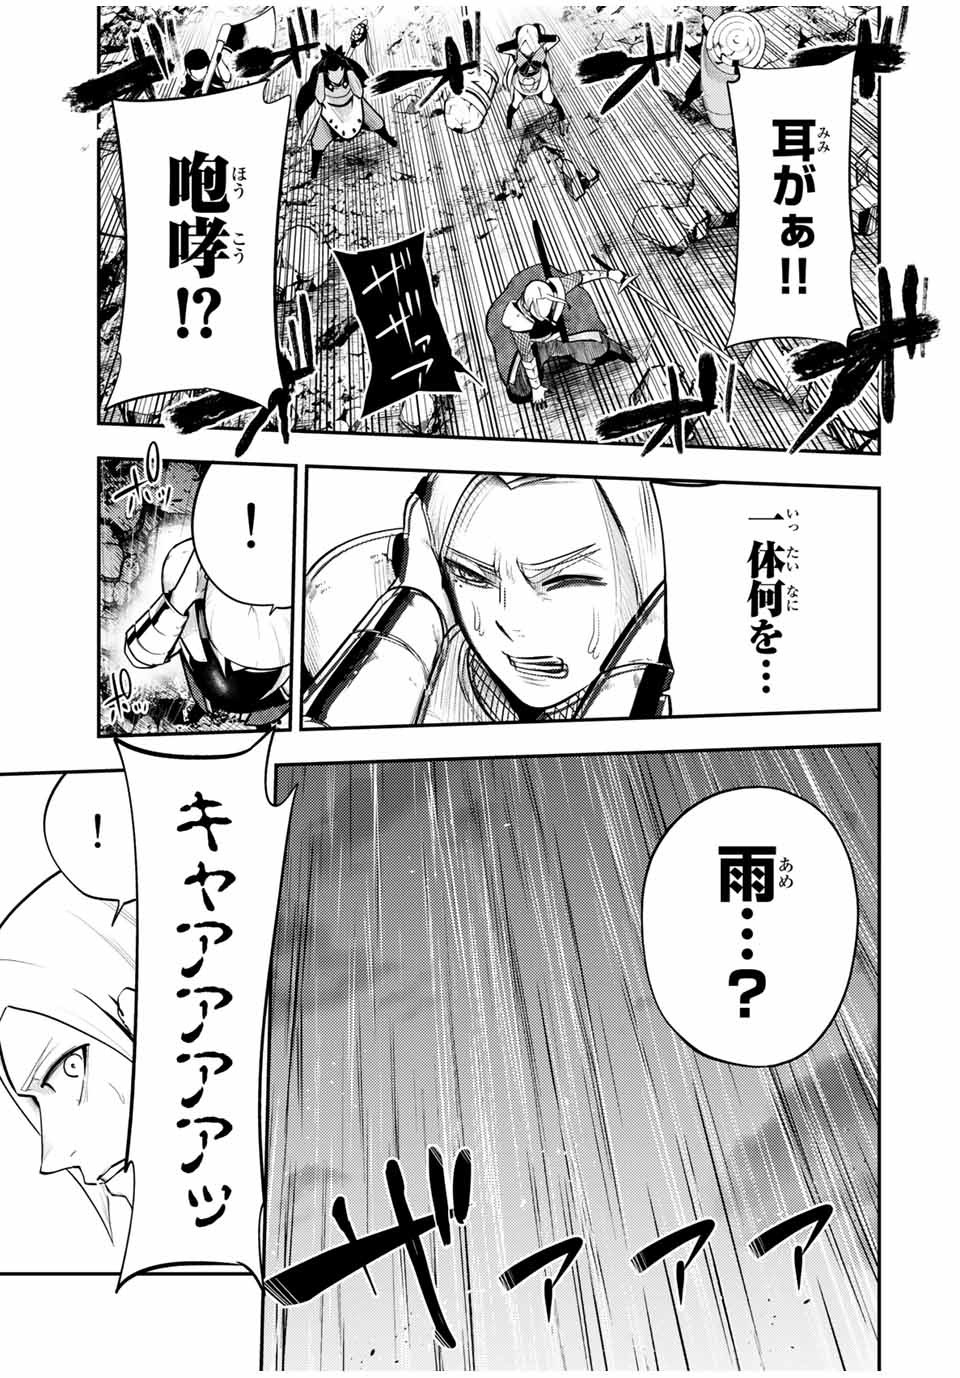 the strongest former prince-; 奴隷転生 ～その奴隷、最強の元王子につき～ 第57話 - Page 15